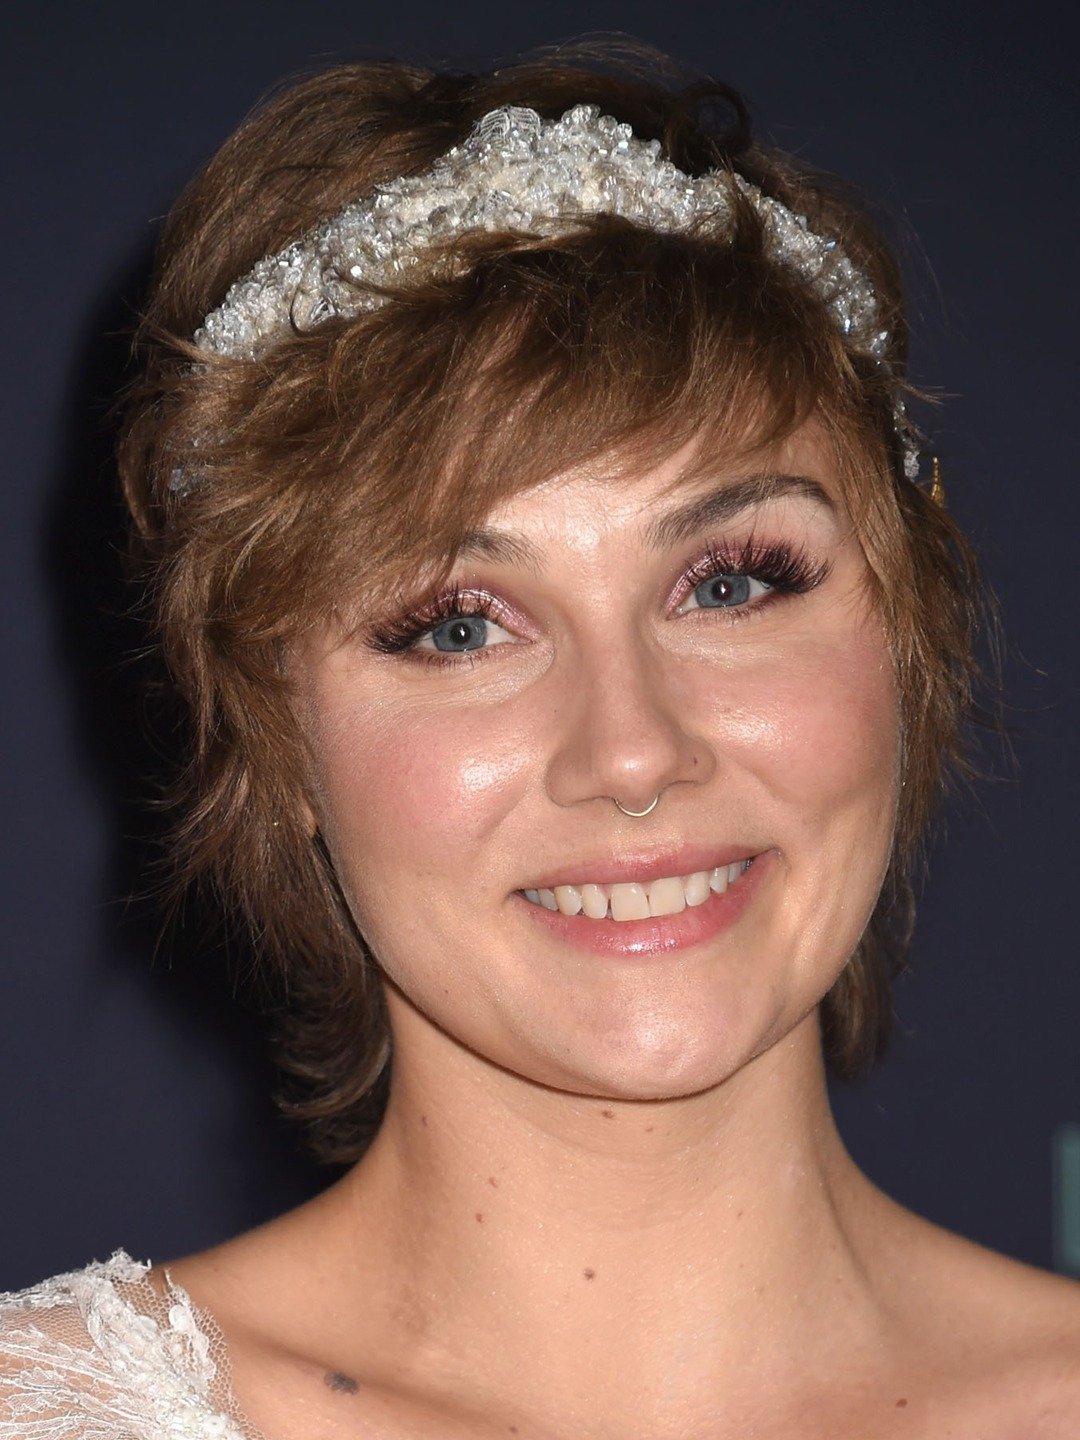 How tall is Clare Bowen?